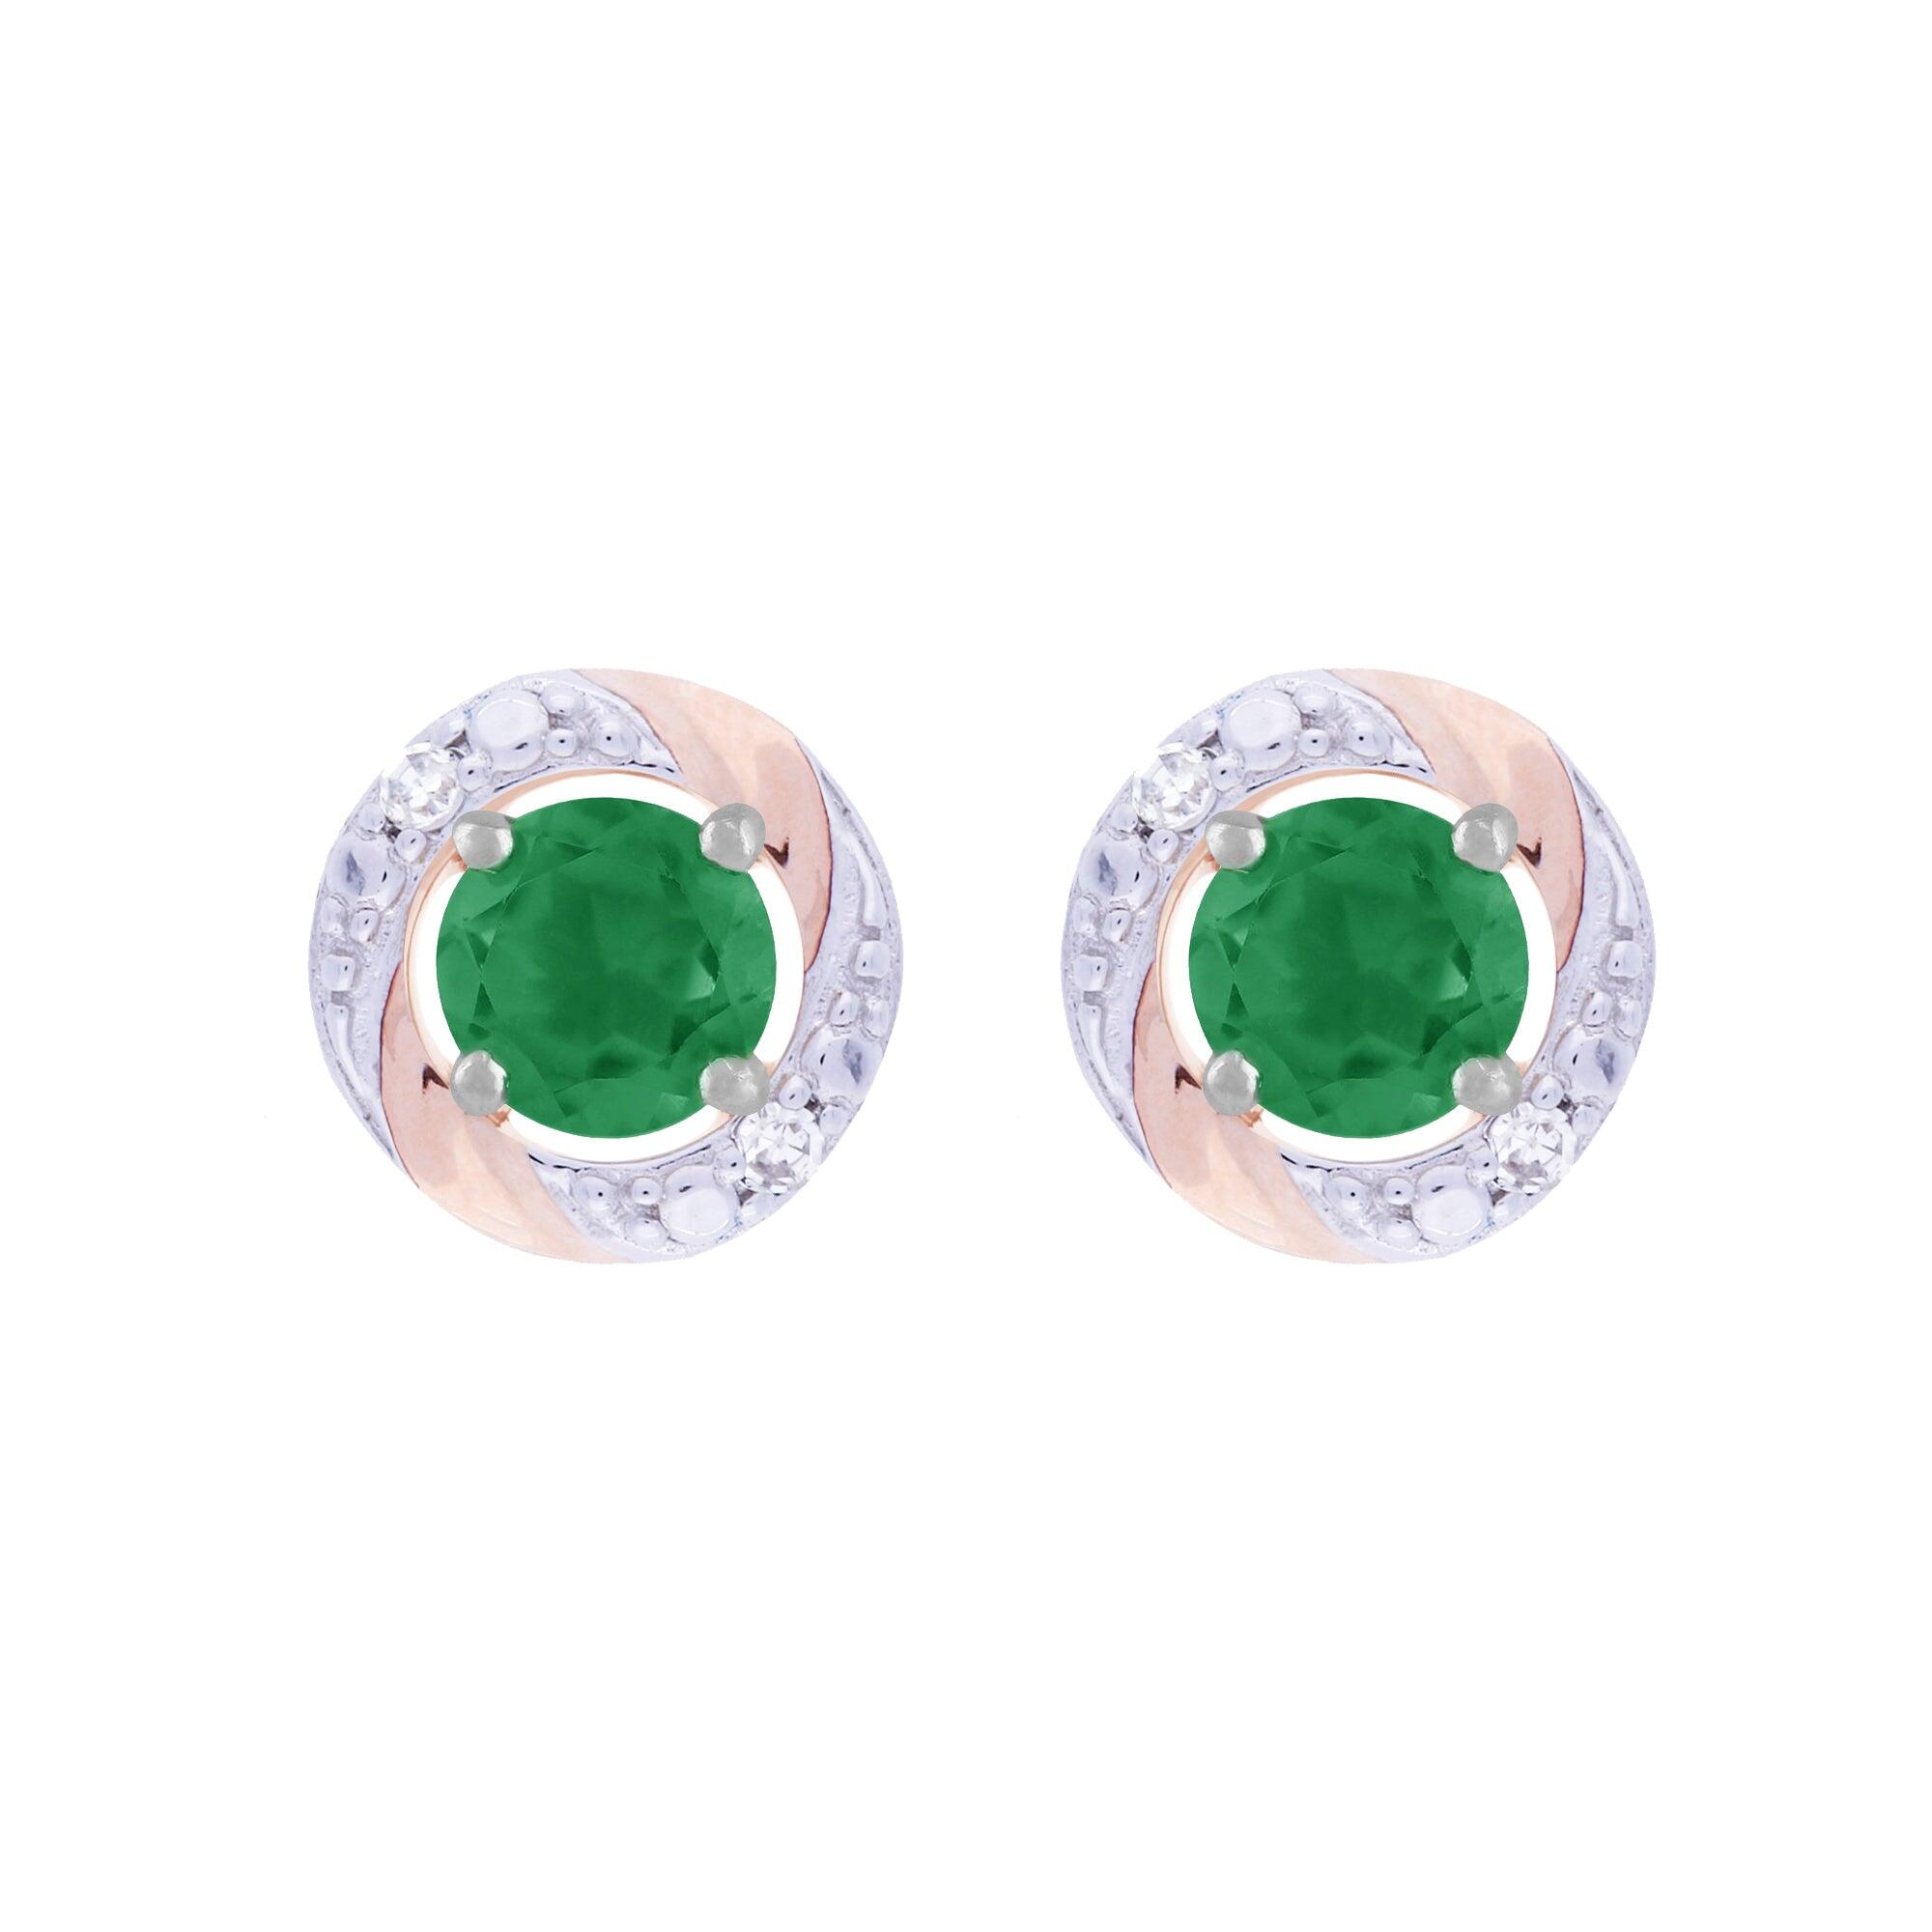 Classic Round Emerald Stud Earrings with Detachable Diamond Round Earrings Jacket Set in 9ct White Gold